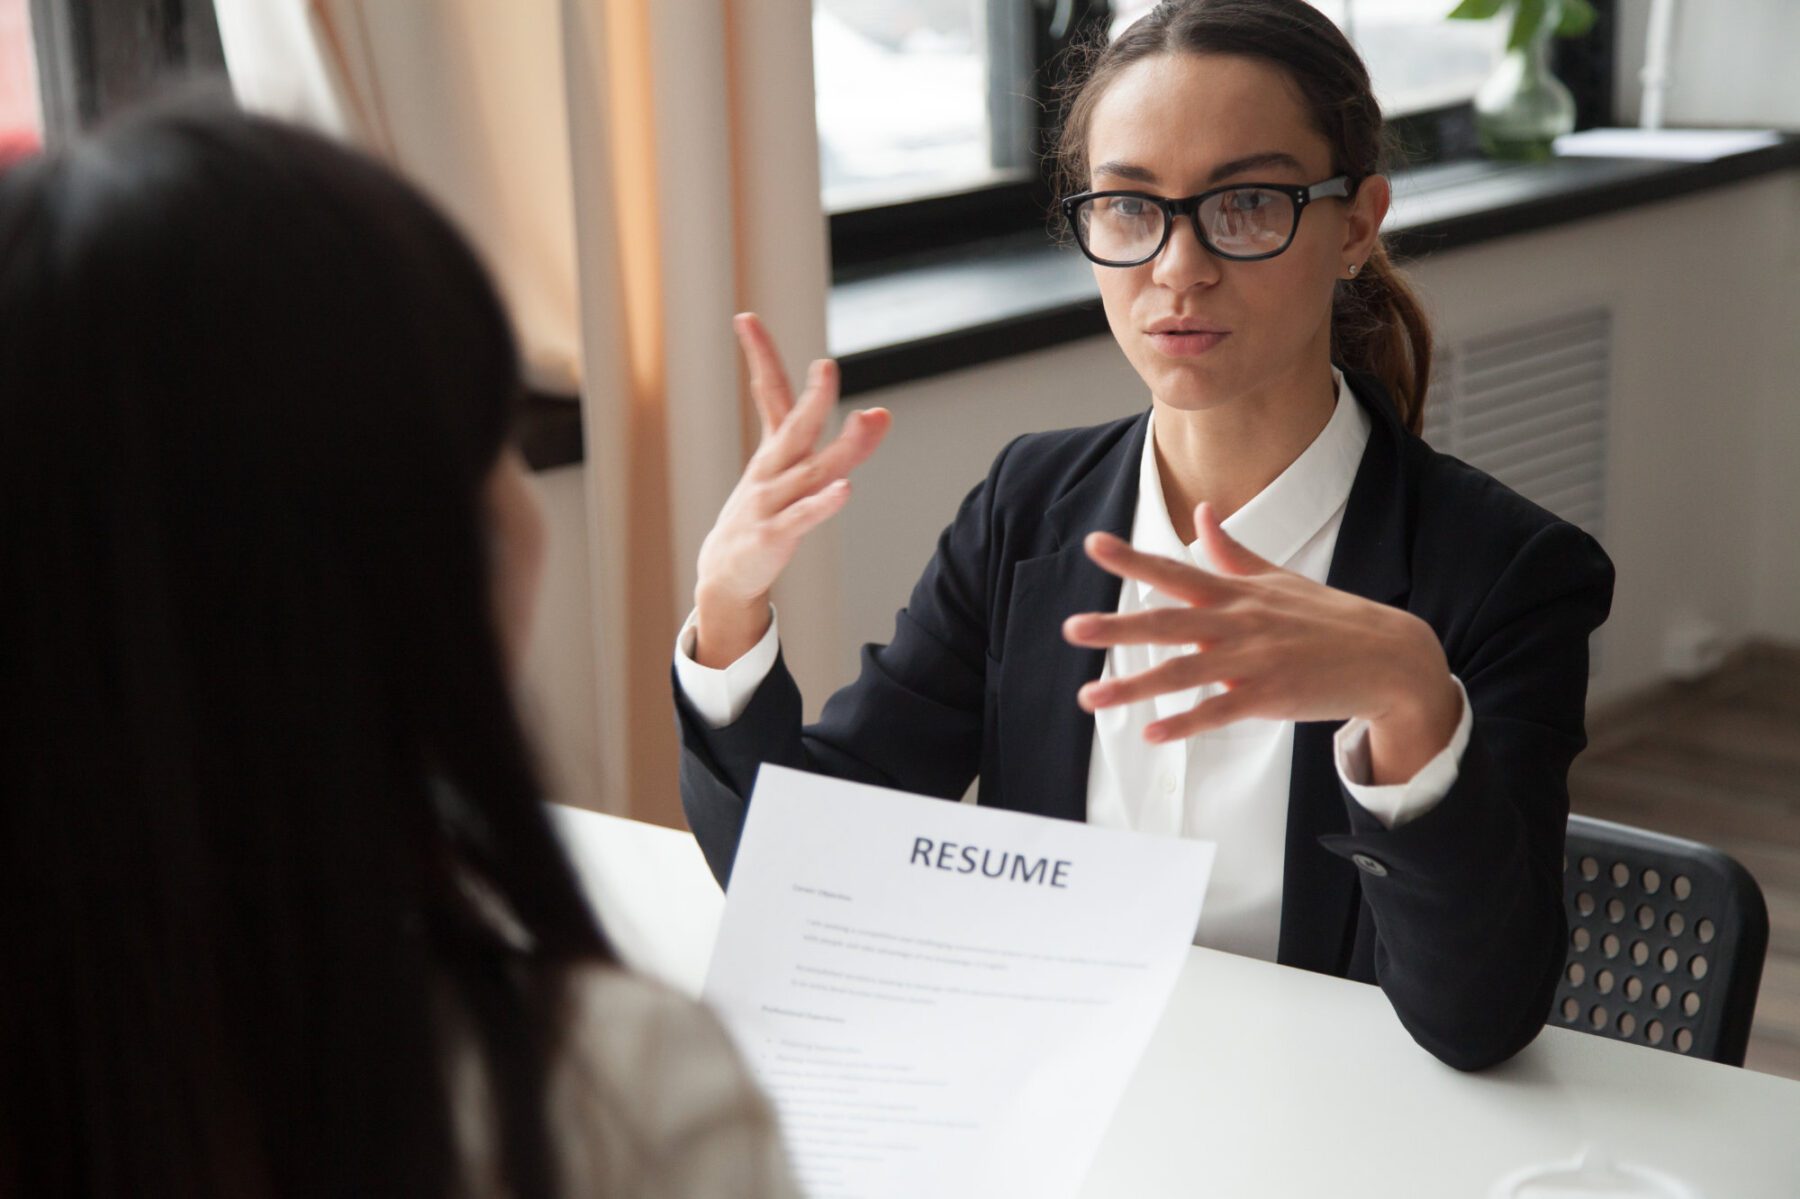 Ask This, Not That – Legal Alternatives to 6 Illegal Interview Questions